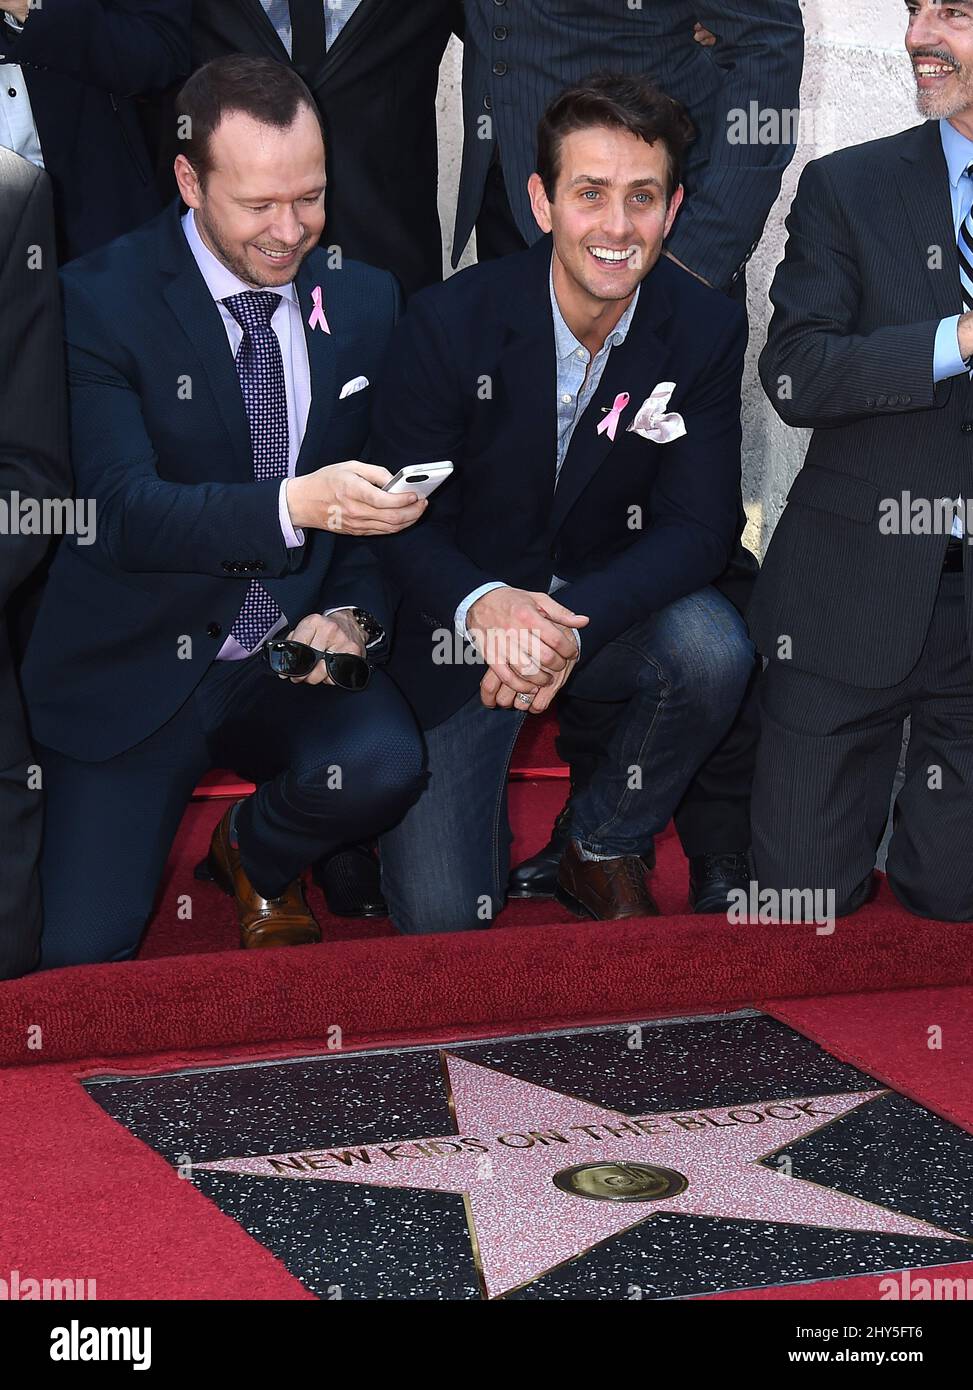 Donnie Wahlberg and Joey McIntyre attending the New Kids on the Block Walk of Fame Star Ceremony on Hollywood Blvd, Hollywood, California. Stock Photo